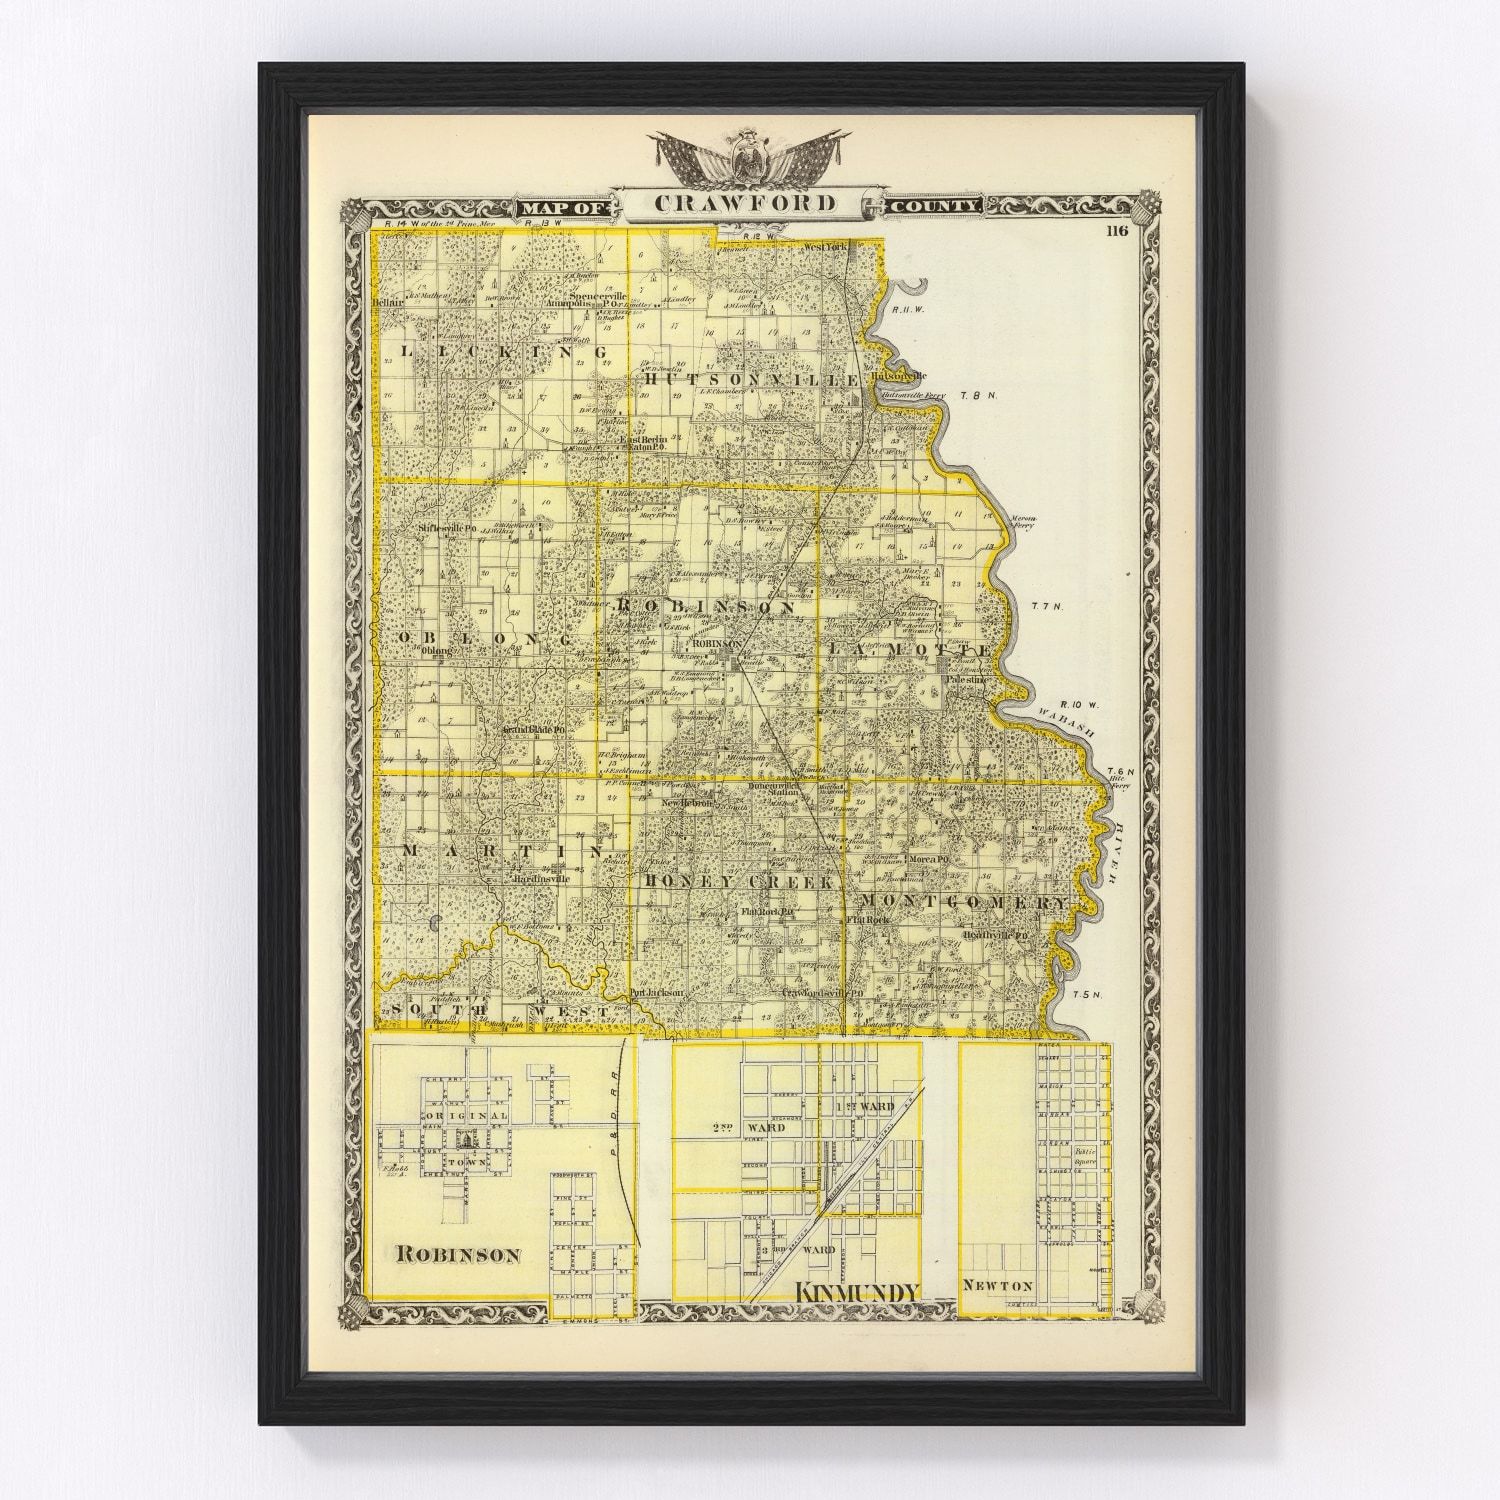 Vintage Map Of Crawford County Illinois 1876 By Teds Vintage Art 2611